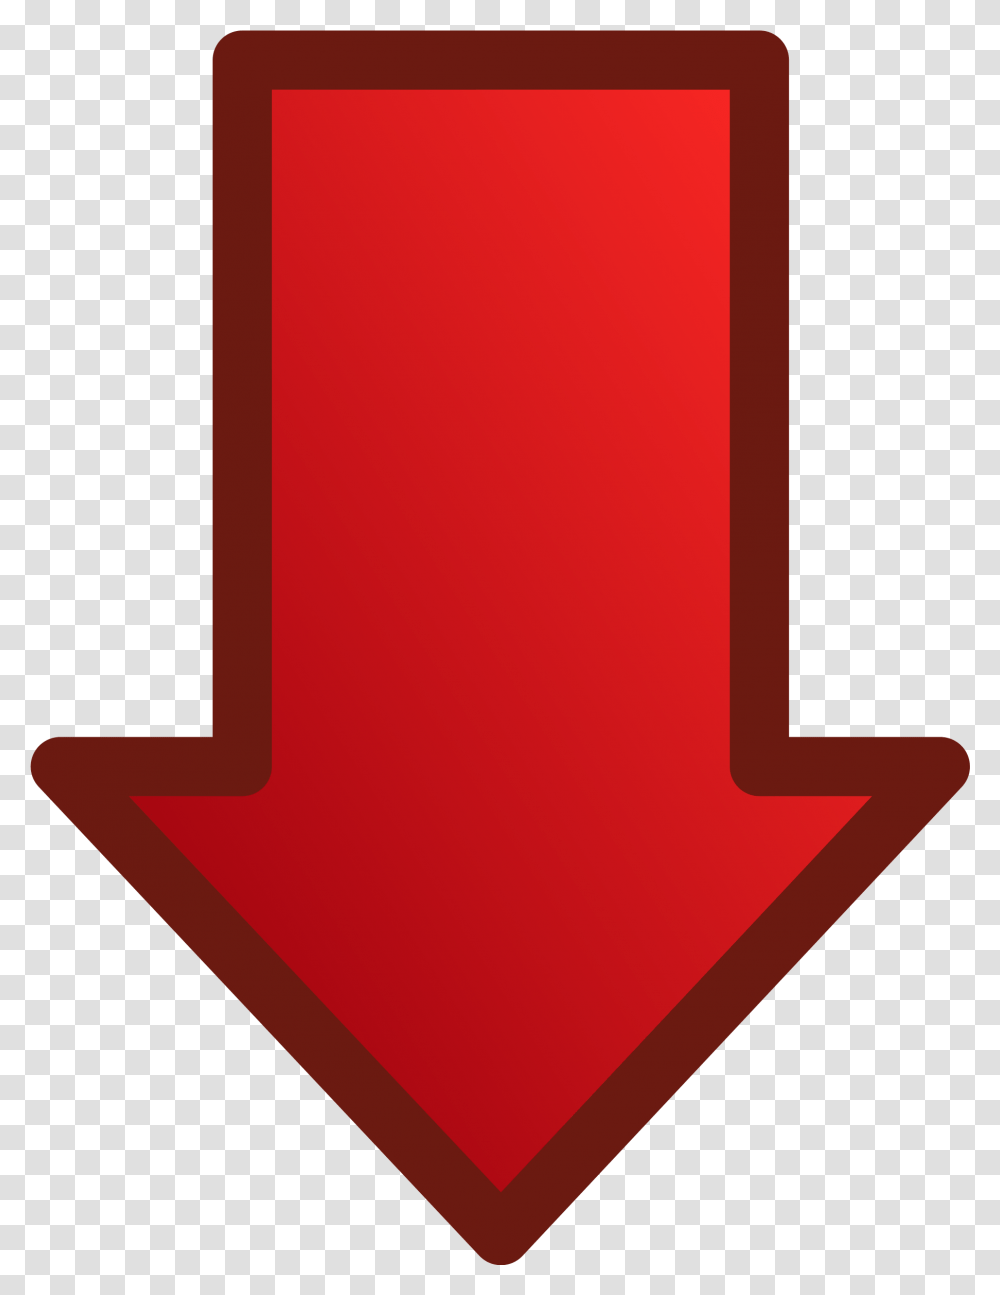 Pointing Clipart Red Picture Red Arrow Pointing Down, Tombstone, Symbol, Crystal Transparent Png